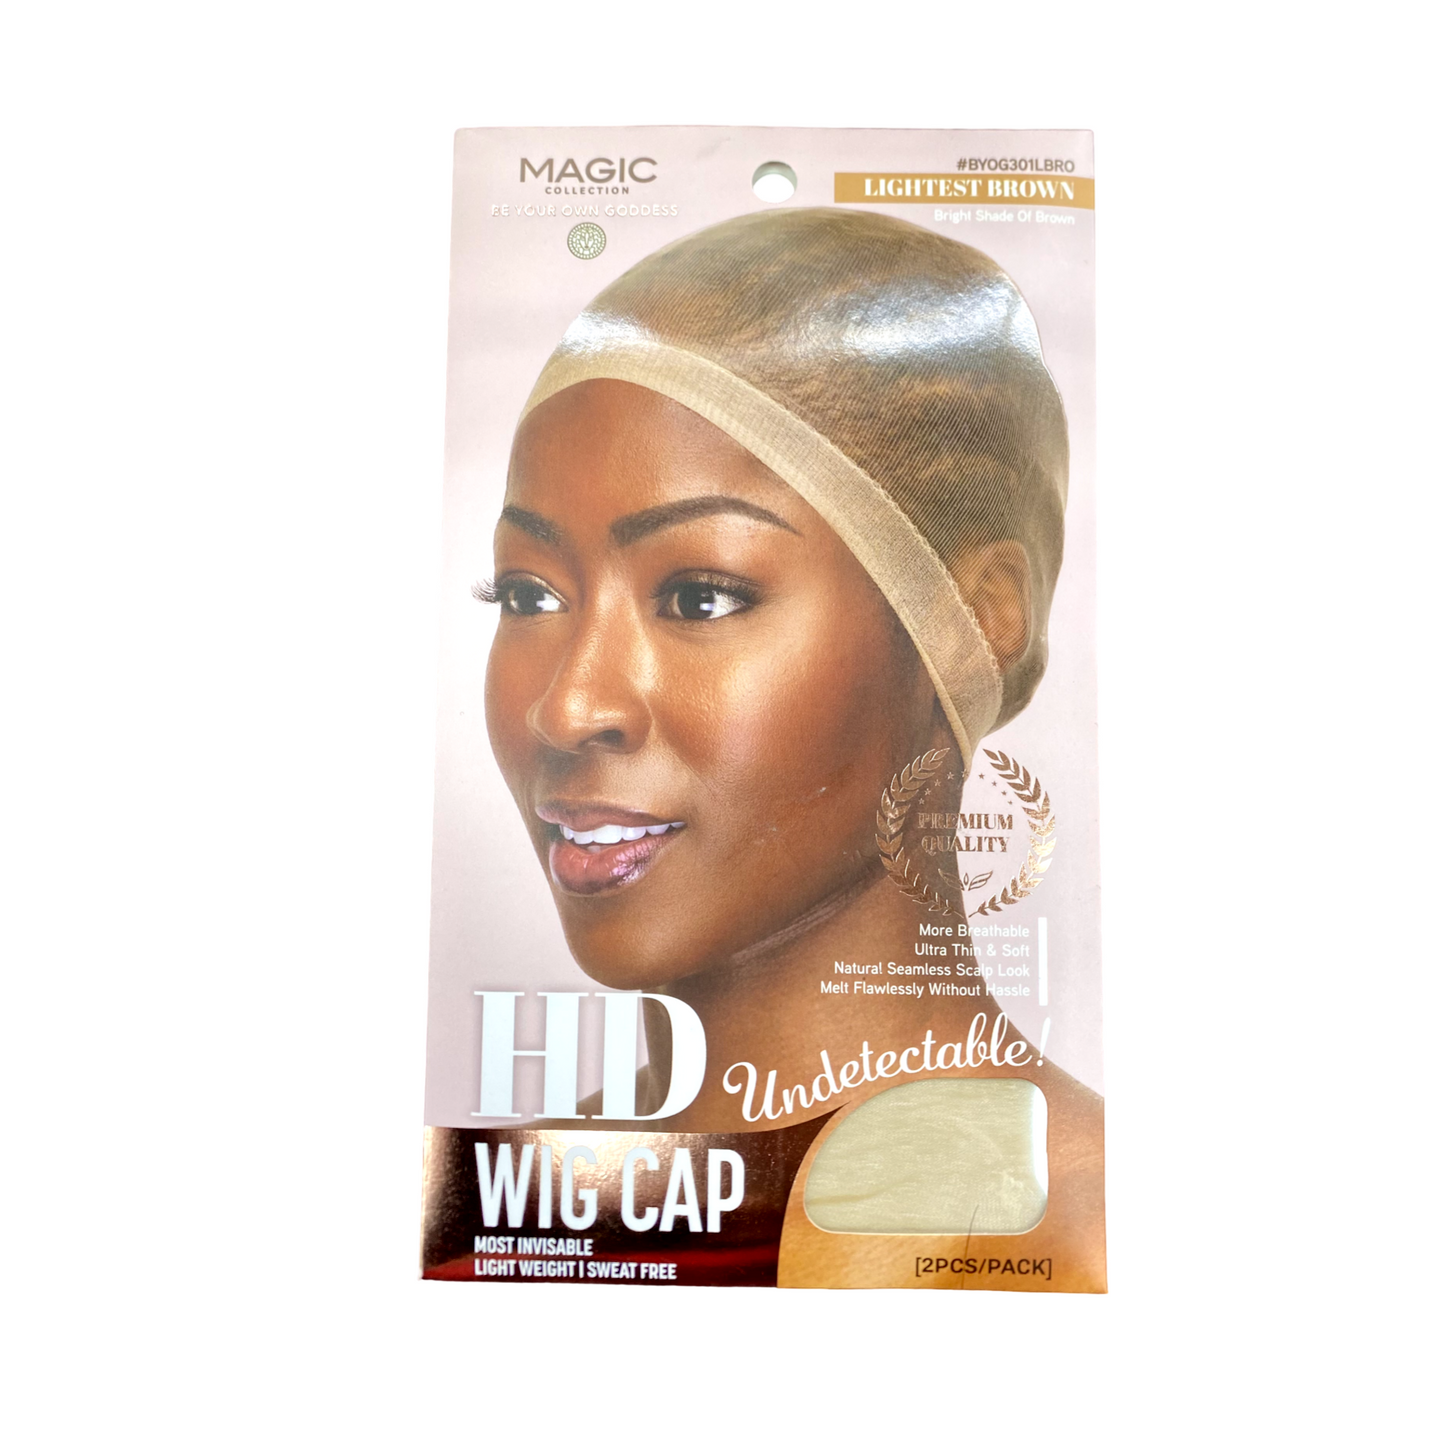 Magic Collection Undetectable Hd Wig Cap